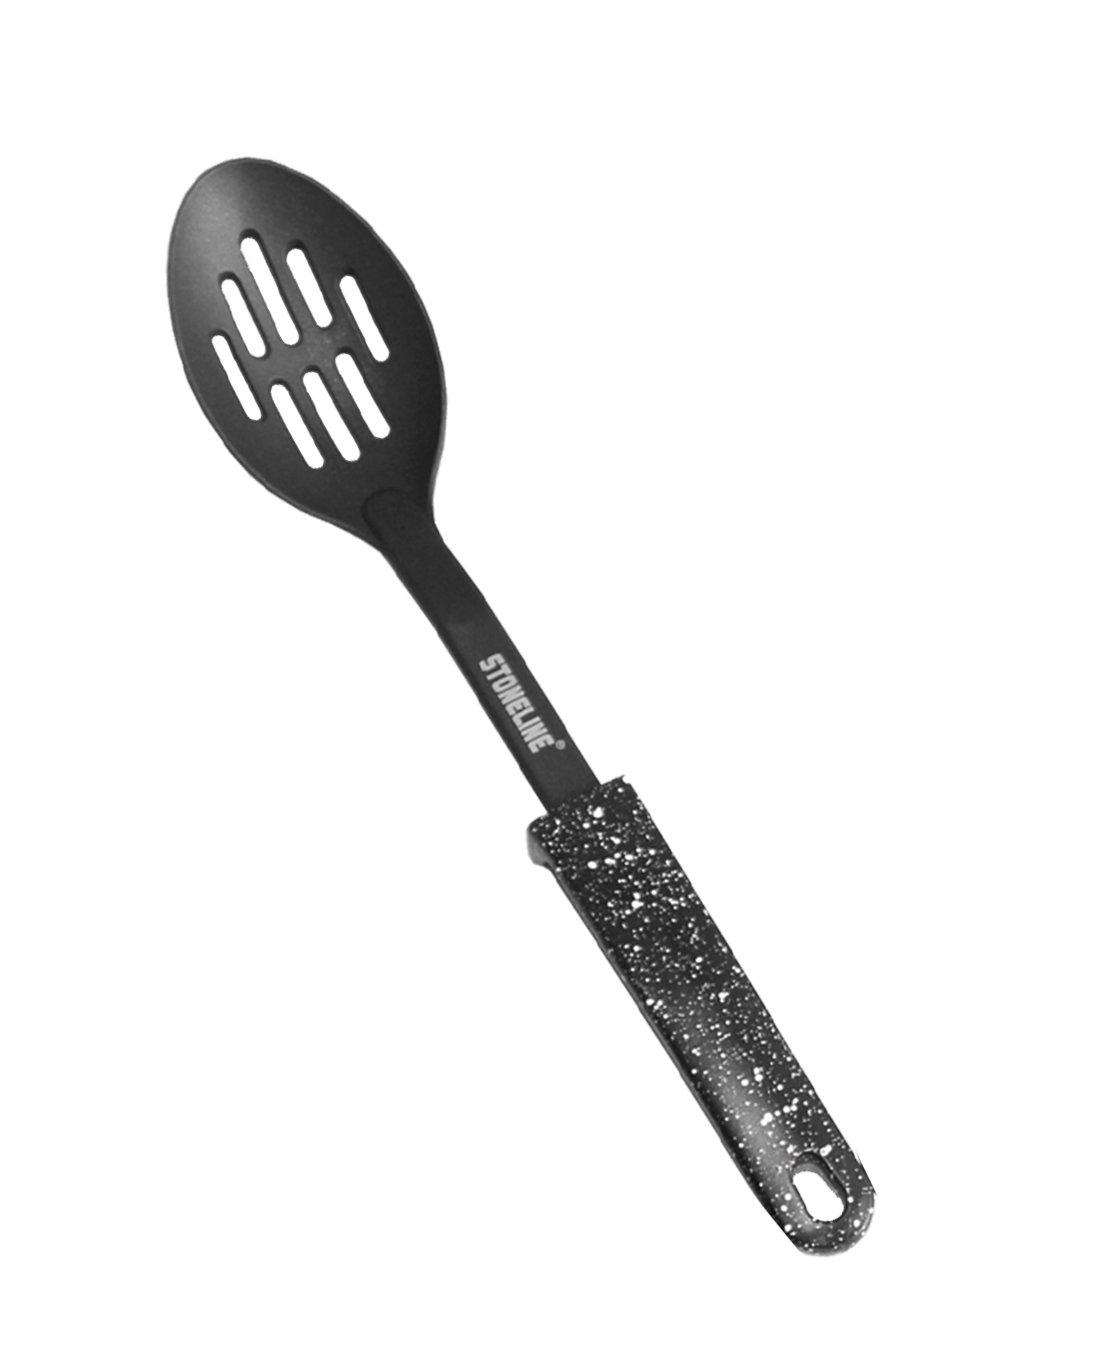 STONELINE® Slotted Serving Spoon 32 cm, Heat Resistant Nylon, for Non-Stick Cookware